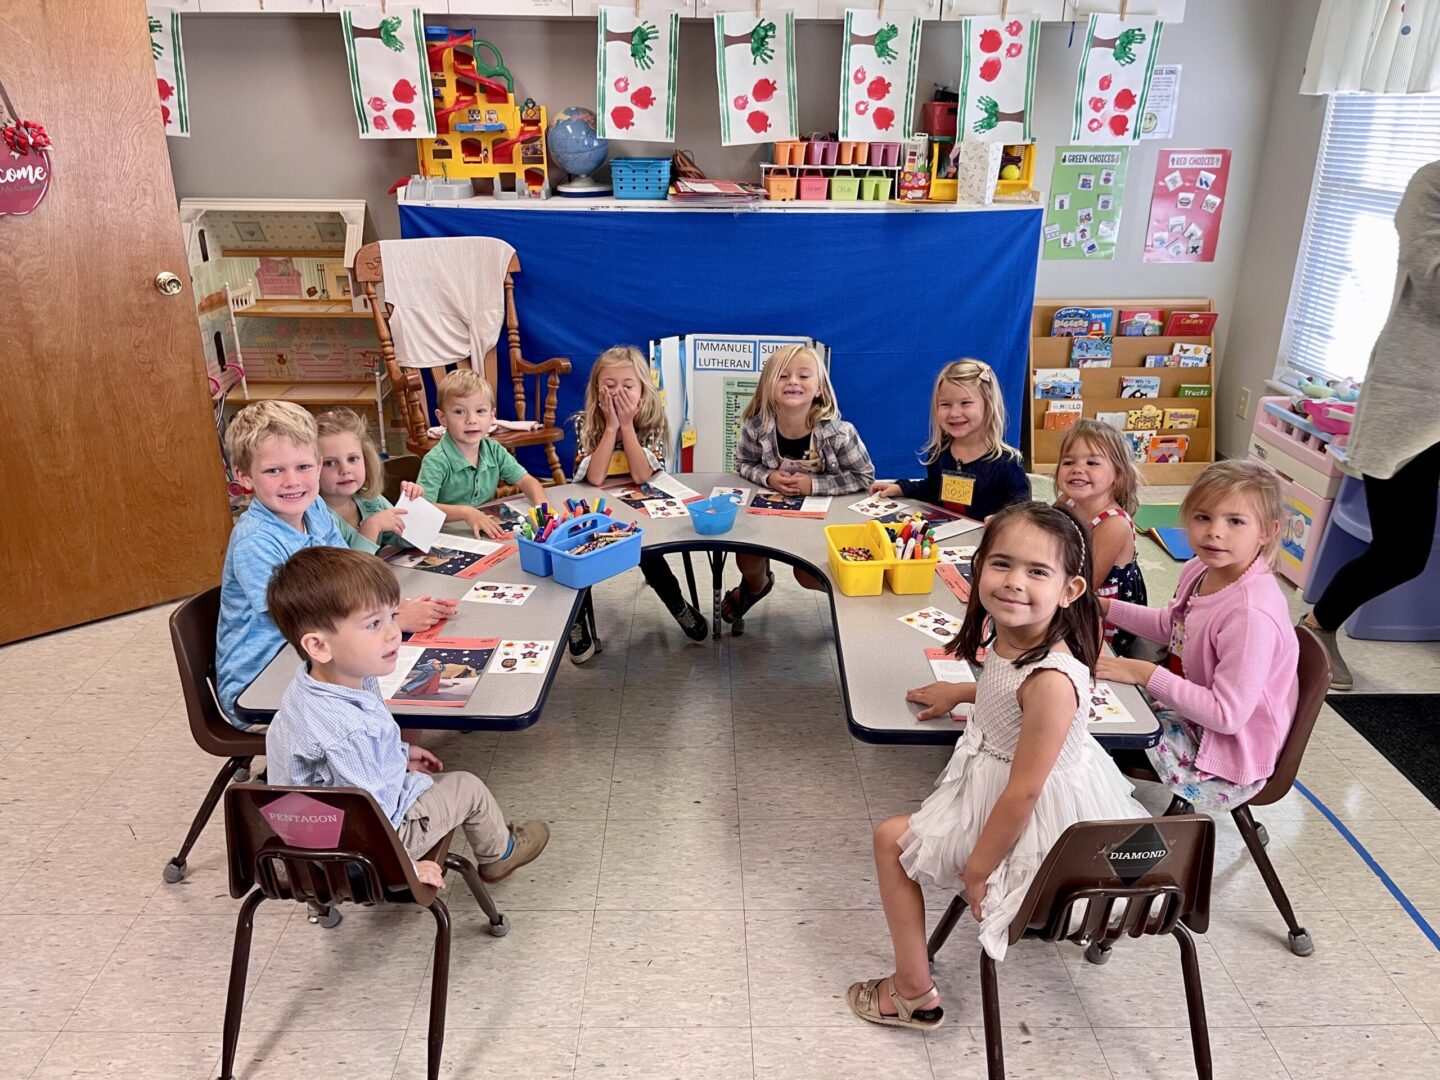 A group of children sitting at a table in a classroom.